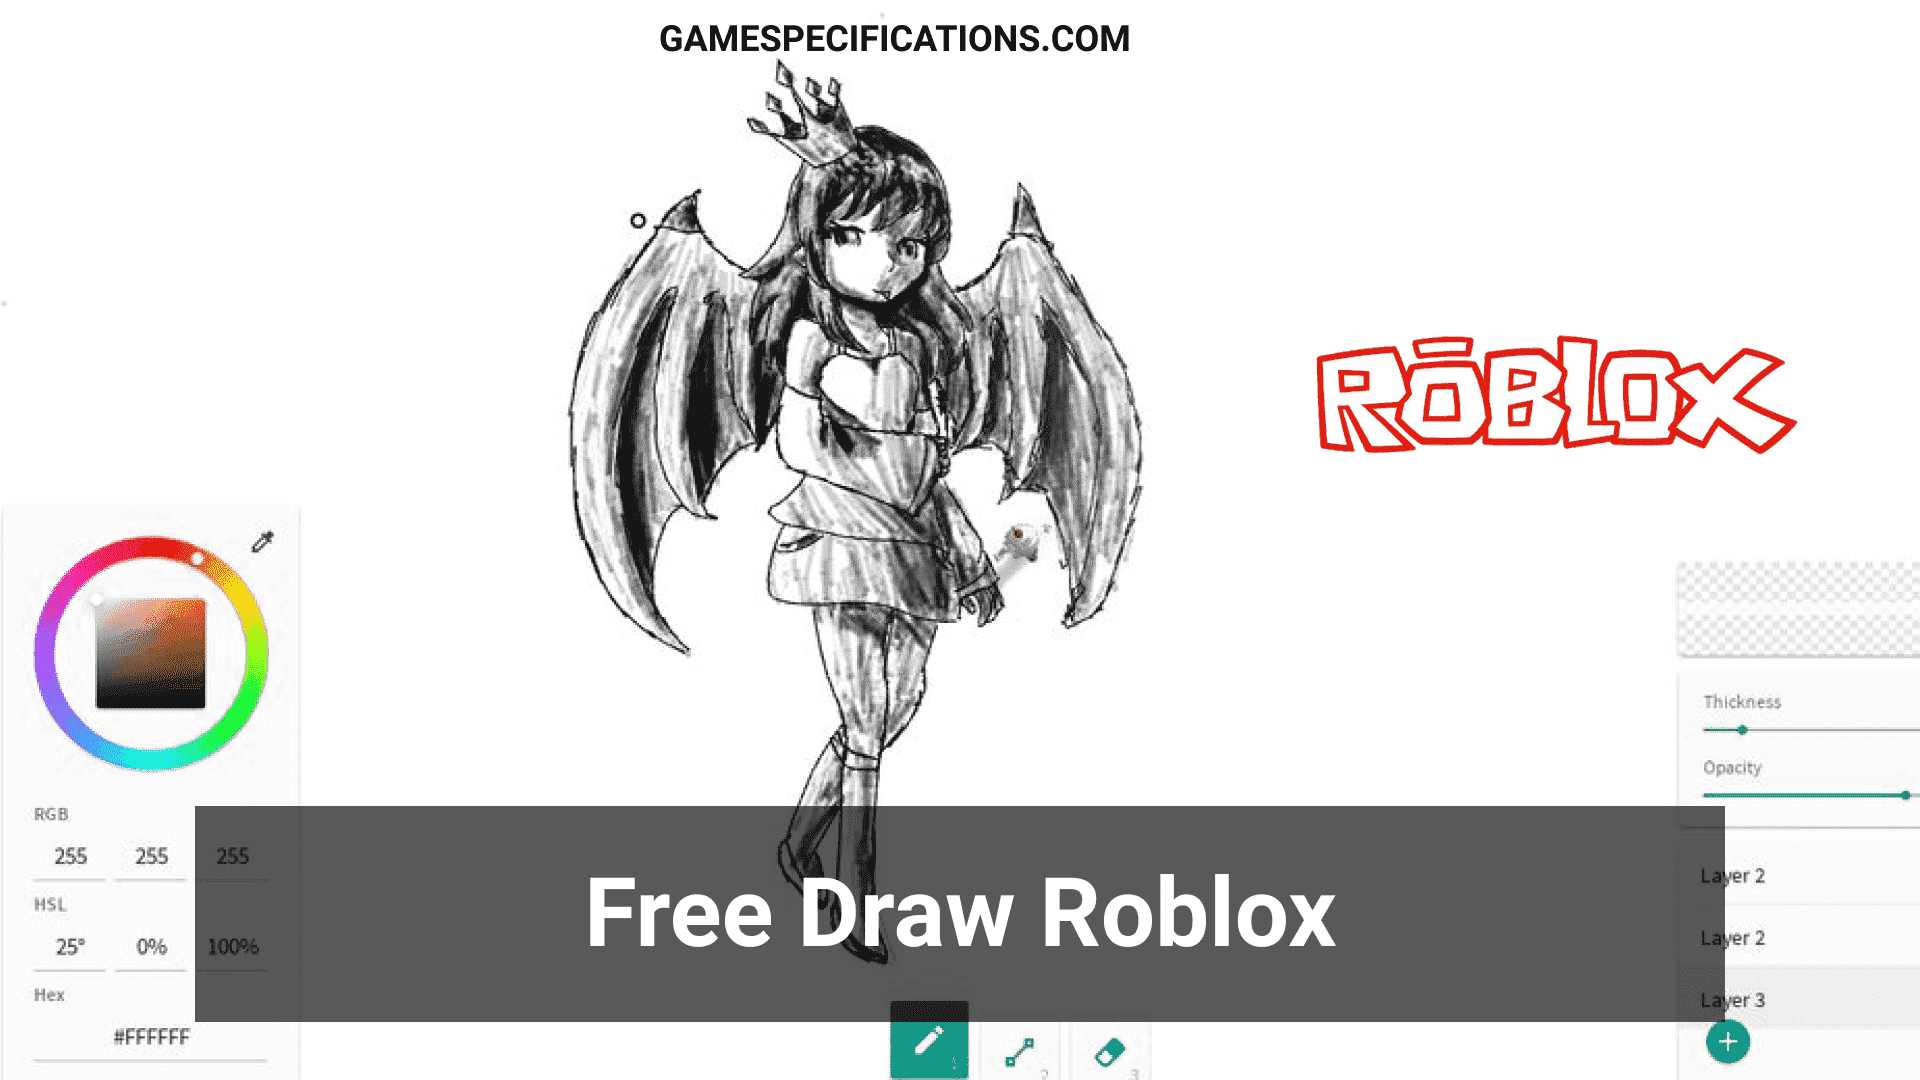 Free Draw Roblox Is A Creative Game To Express Your Skills Game Specifications - art roblox drawing girl